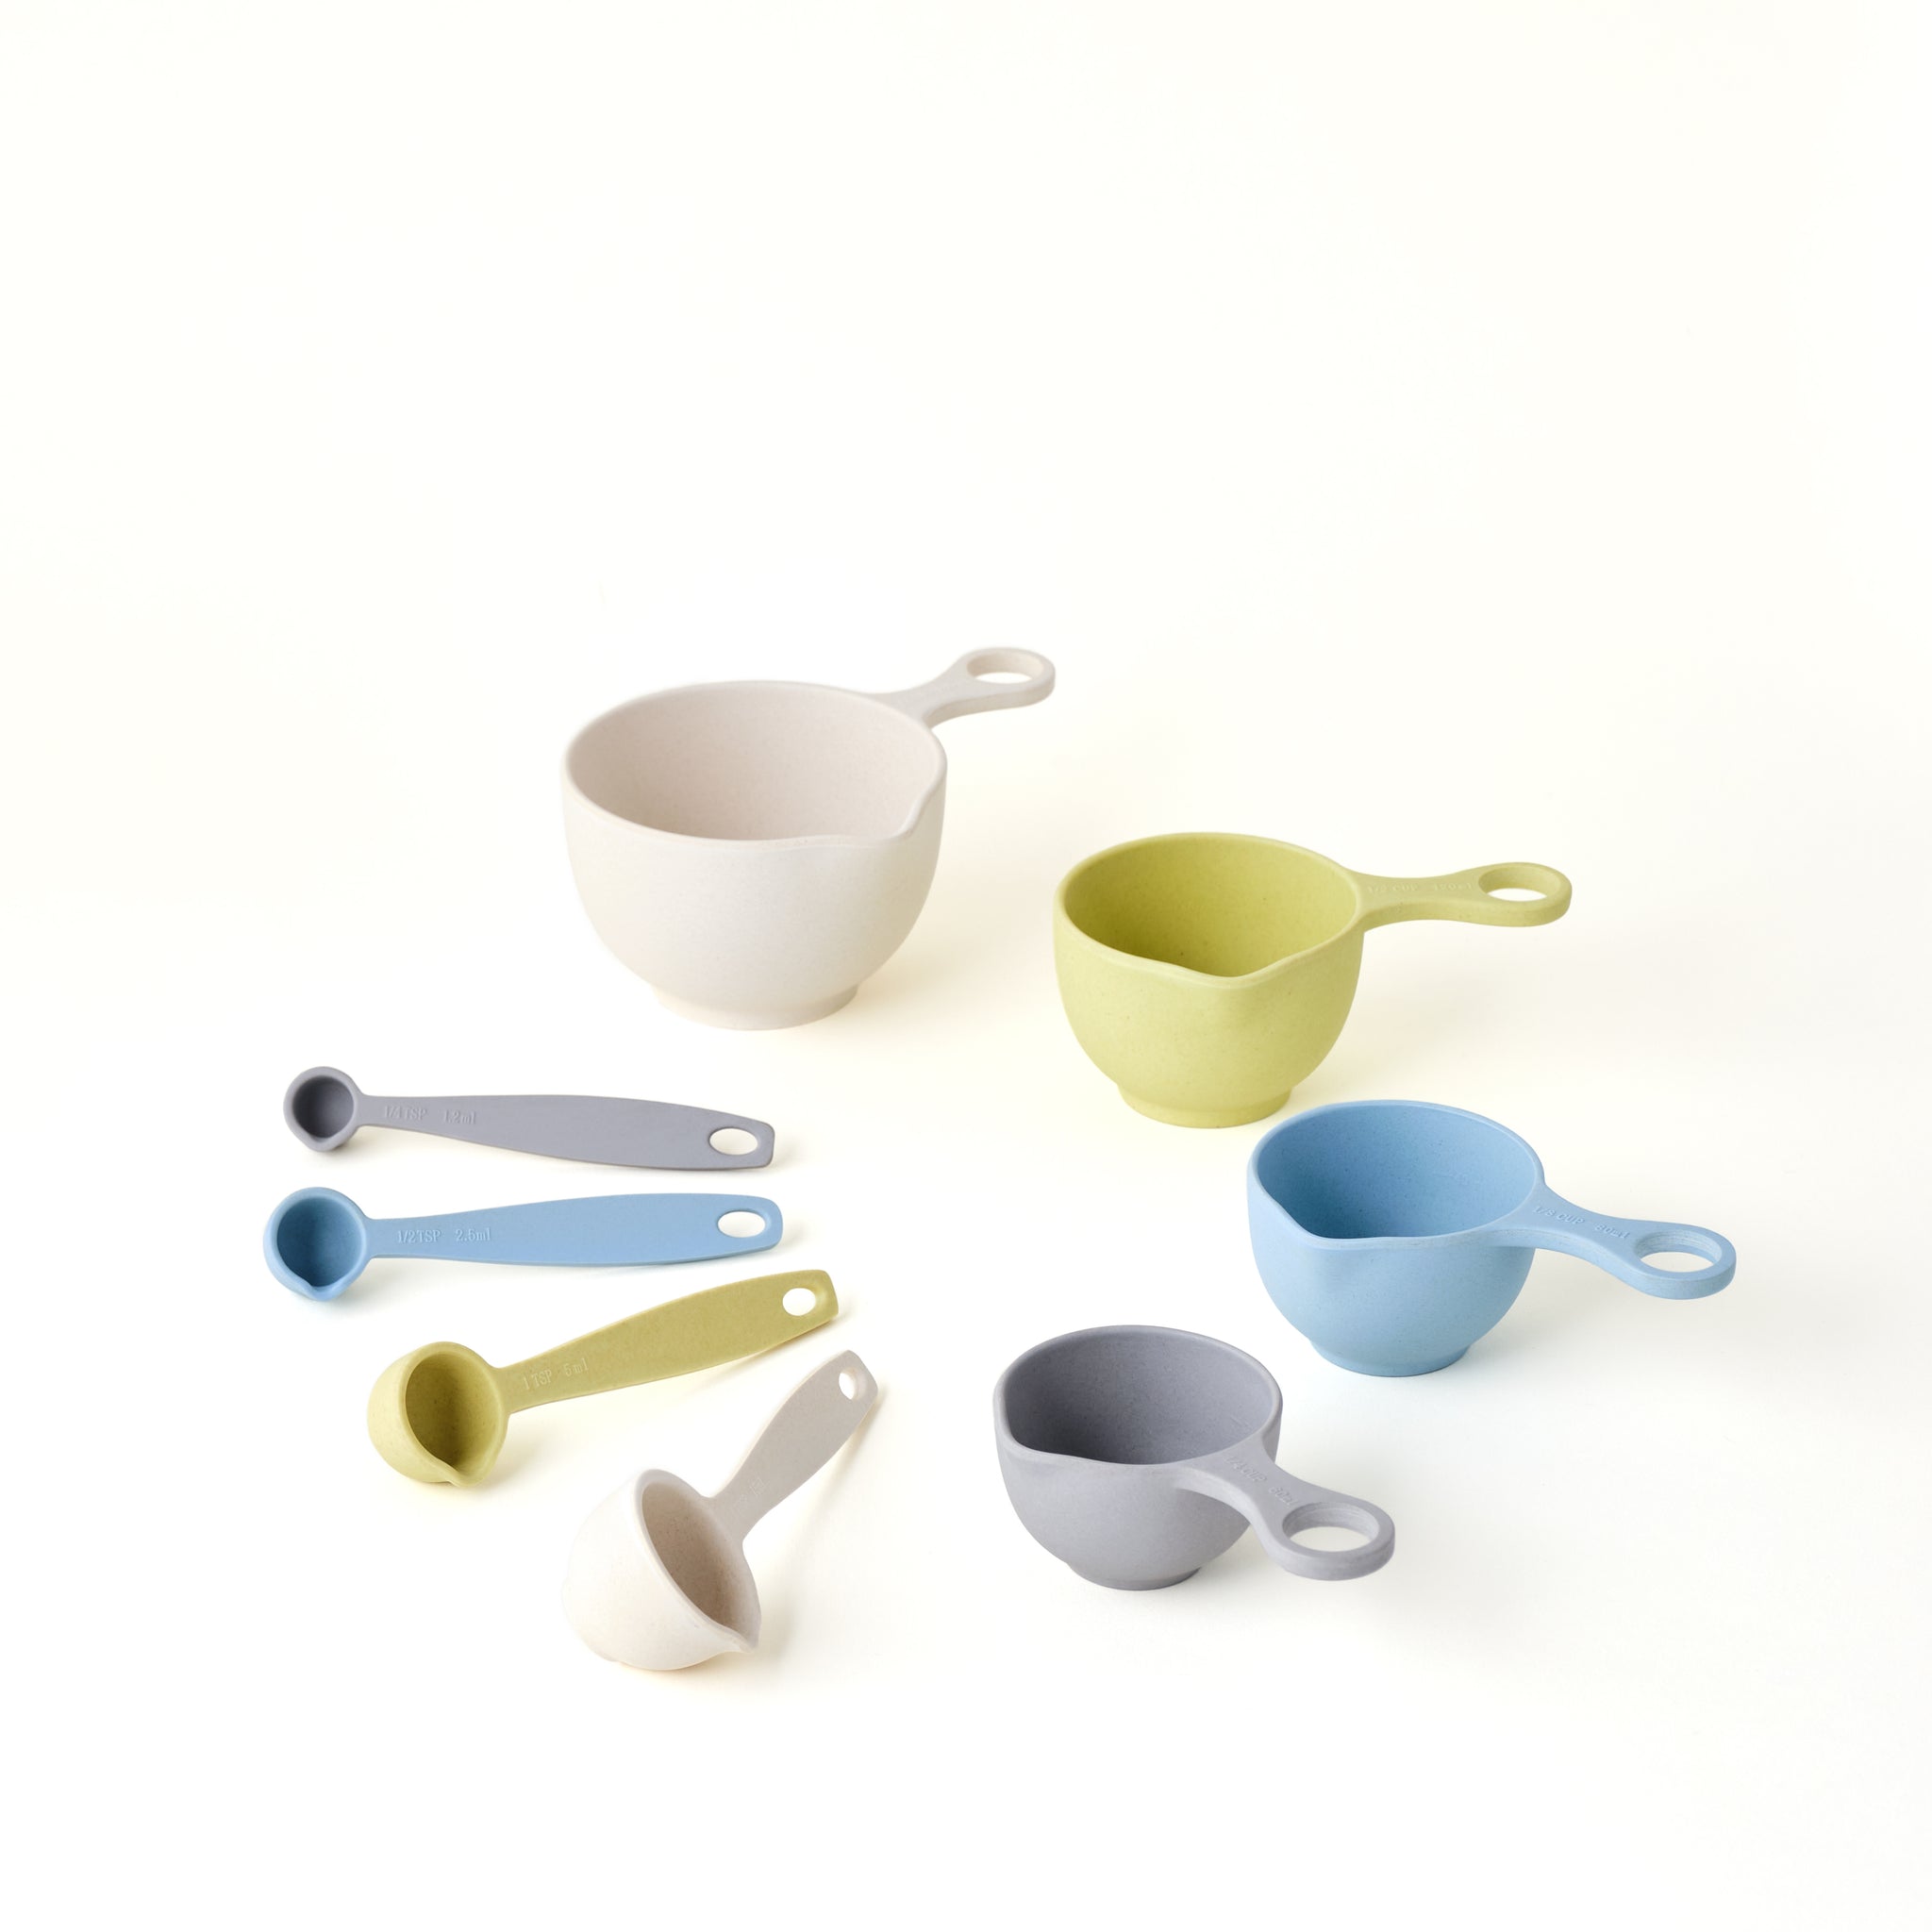 Measuring Cup and Spoon Set